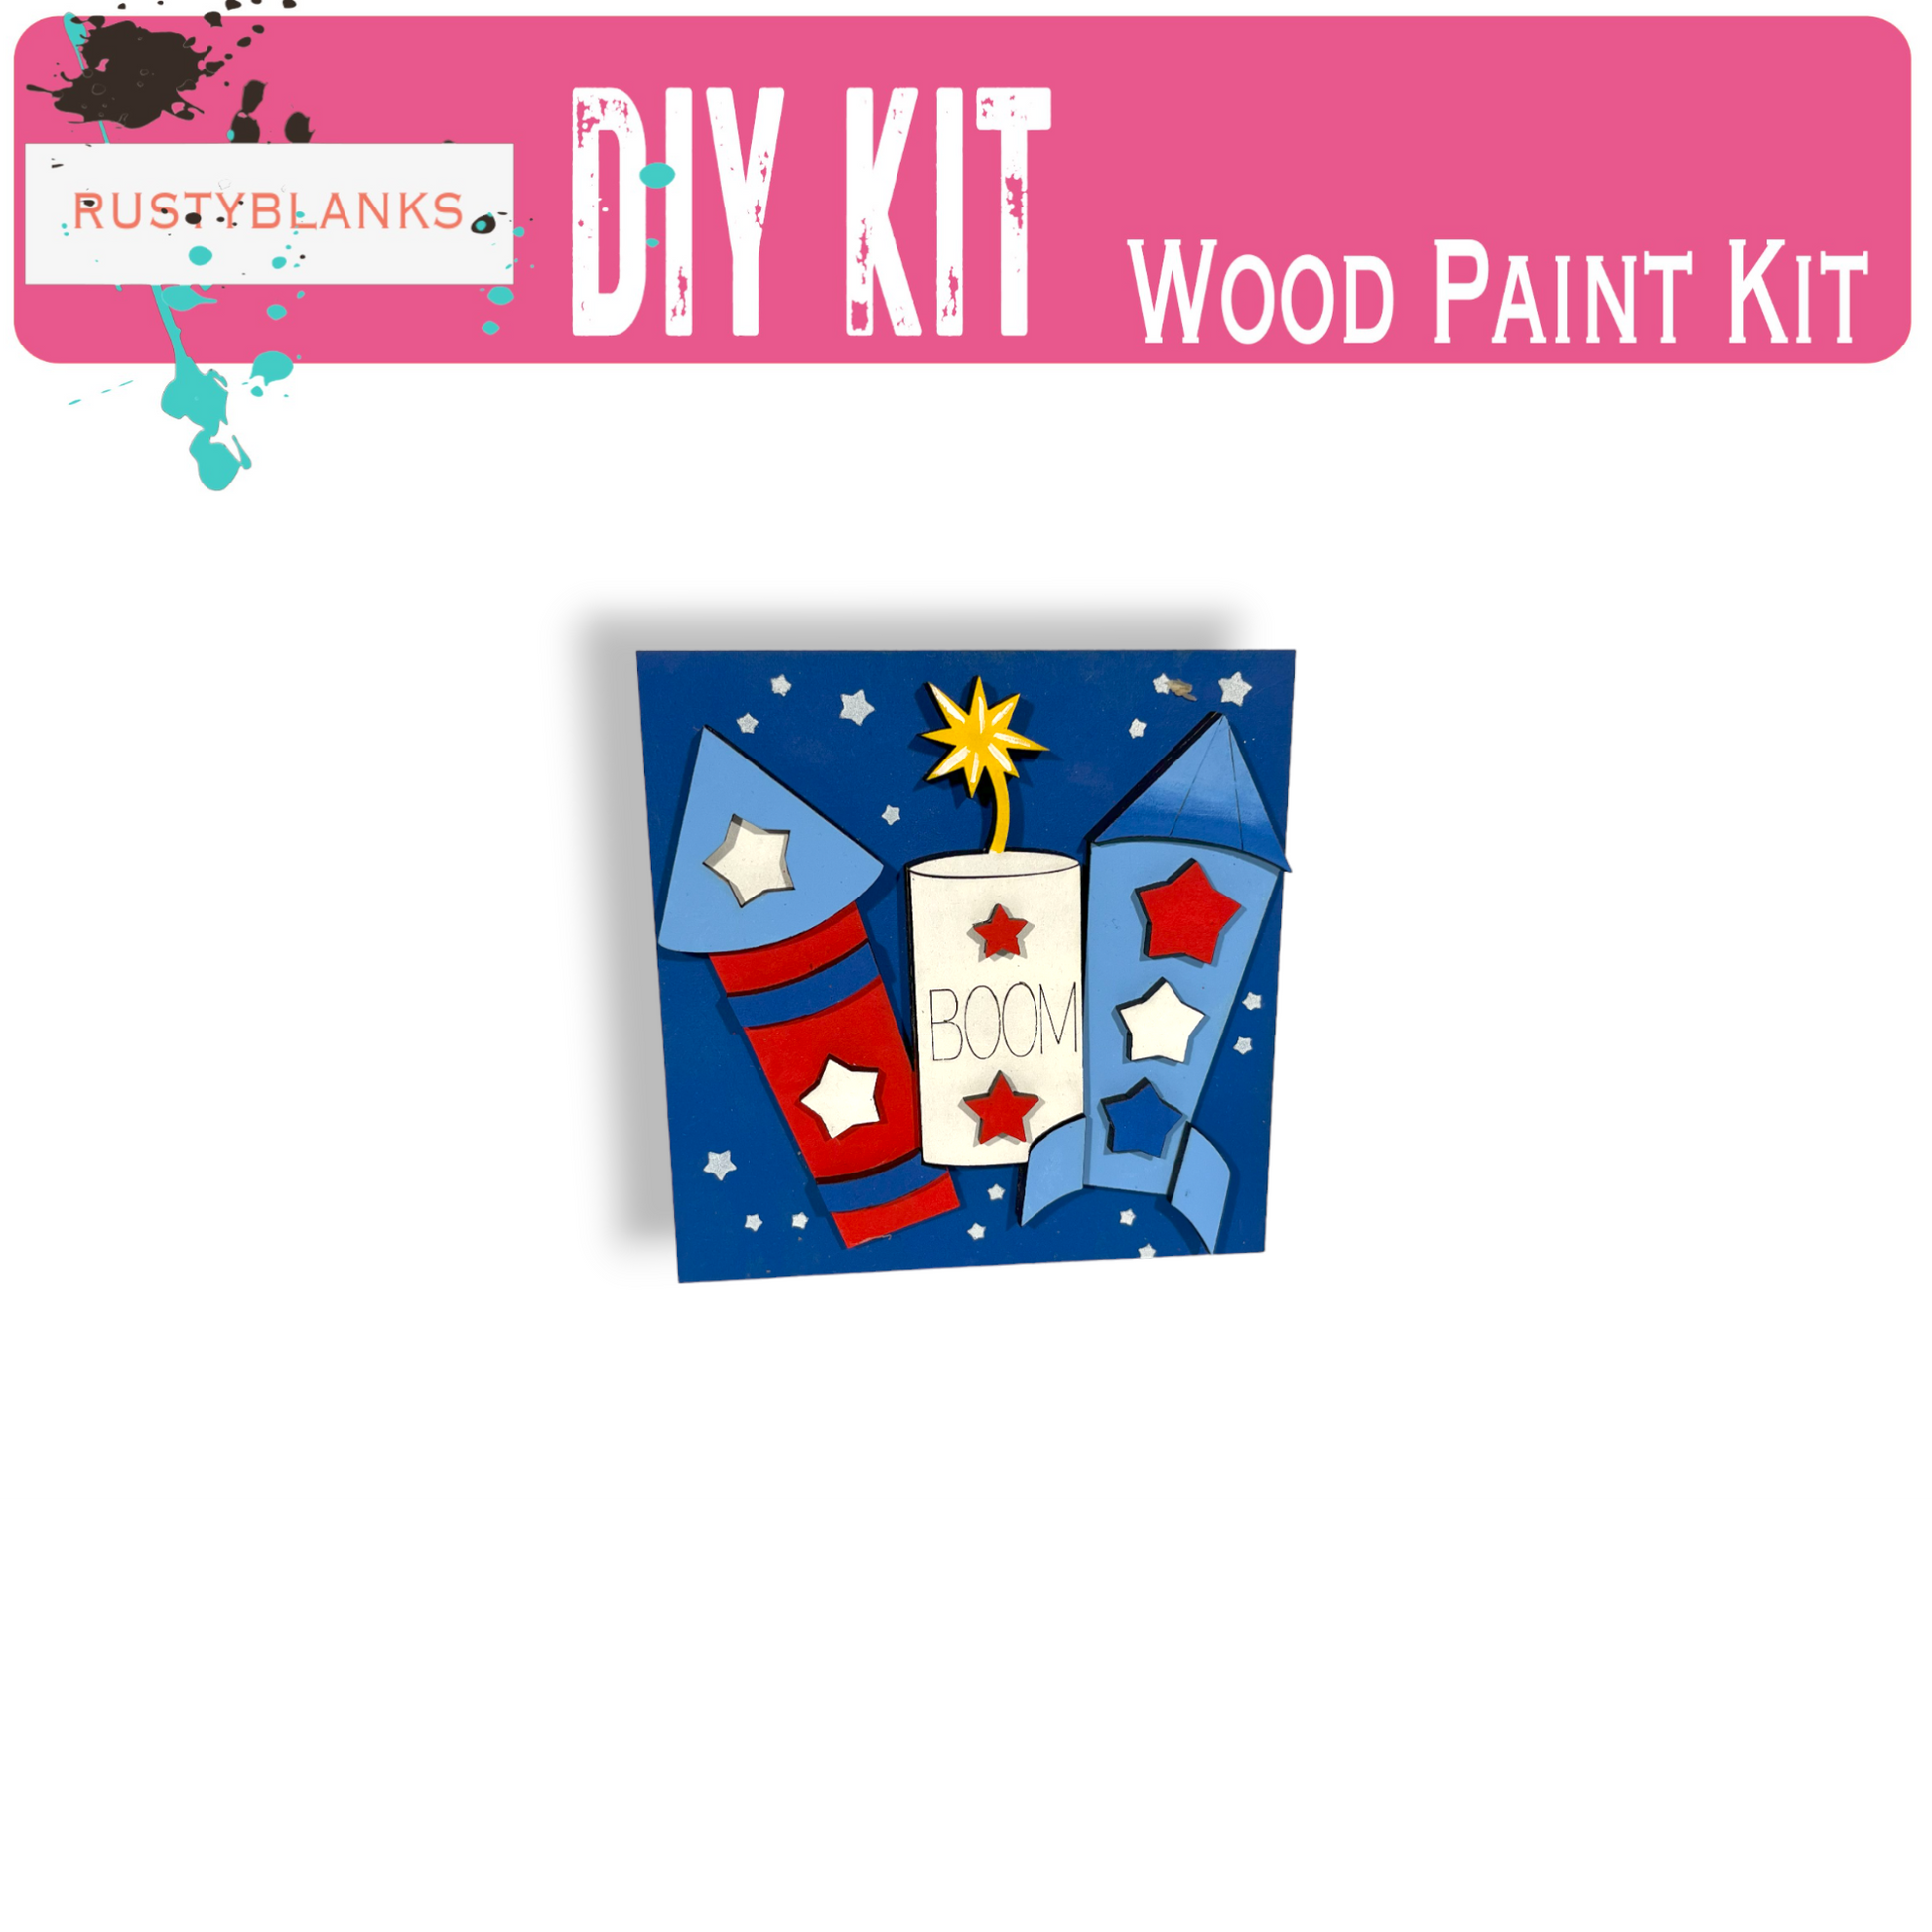 a picture of a wooden painting kit